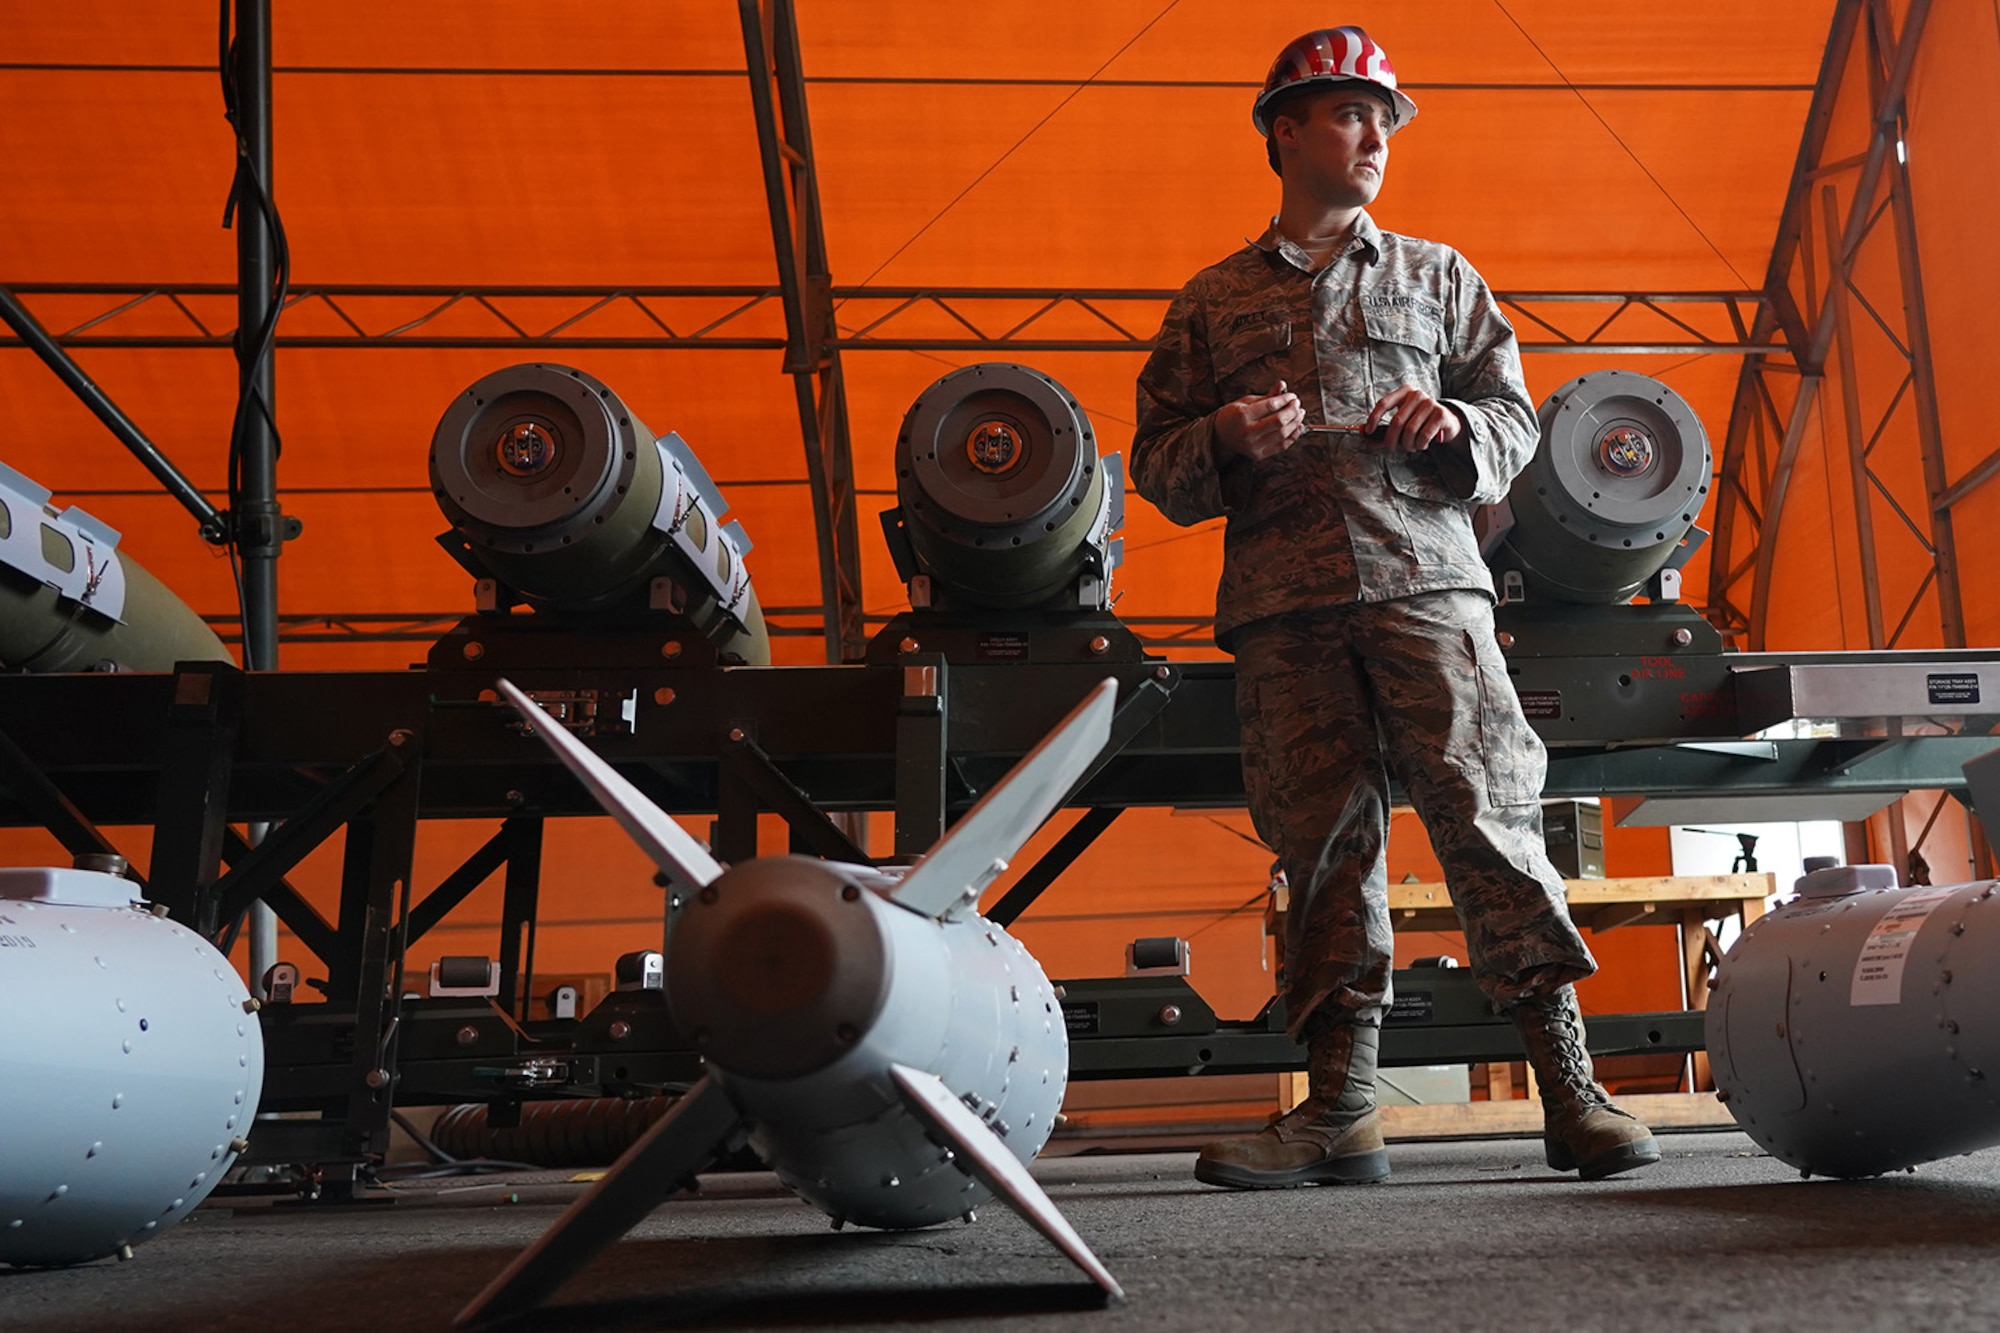 Airman 1st Class Mitchell Bradley, a native of Montgomery, Ala., assigned to the 3rd Munitions Squadron, takes a short break while building GBU-32s (Guided Bomb Units) on Joint Base Elmendorf-Richardson, Alaska, Oct. 2, 2019, during the Polar Force 20-1 exercise. Polar Force 20-1 is designed to exercise multiple elements of the Agile Combat Employment (ACE) concept of operations, which include generating 5th Generation combat power from austere locations, command and control using non-traditional methods, and rapid airlift capabilities to sustain a forward operating location.  The ACE concept enables 3rd Wing to deliver lethal Airpower for America, even in a contested environment.